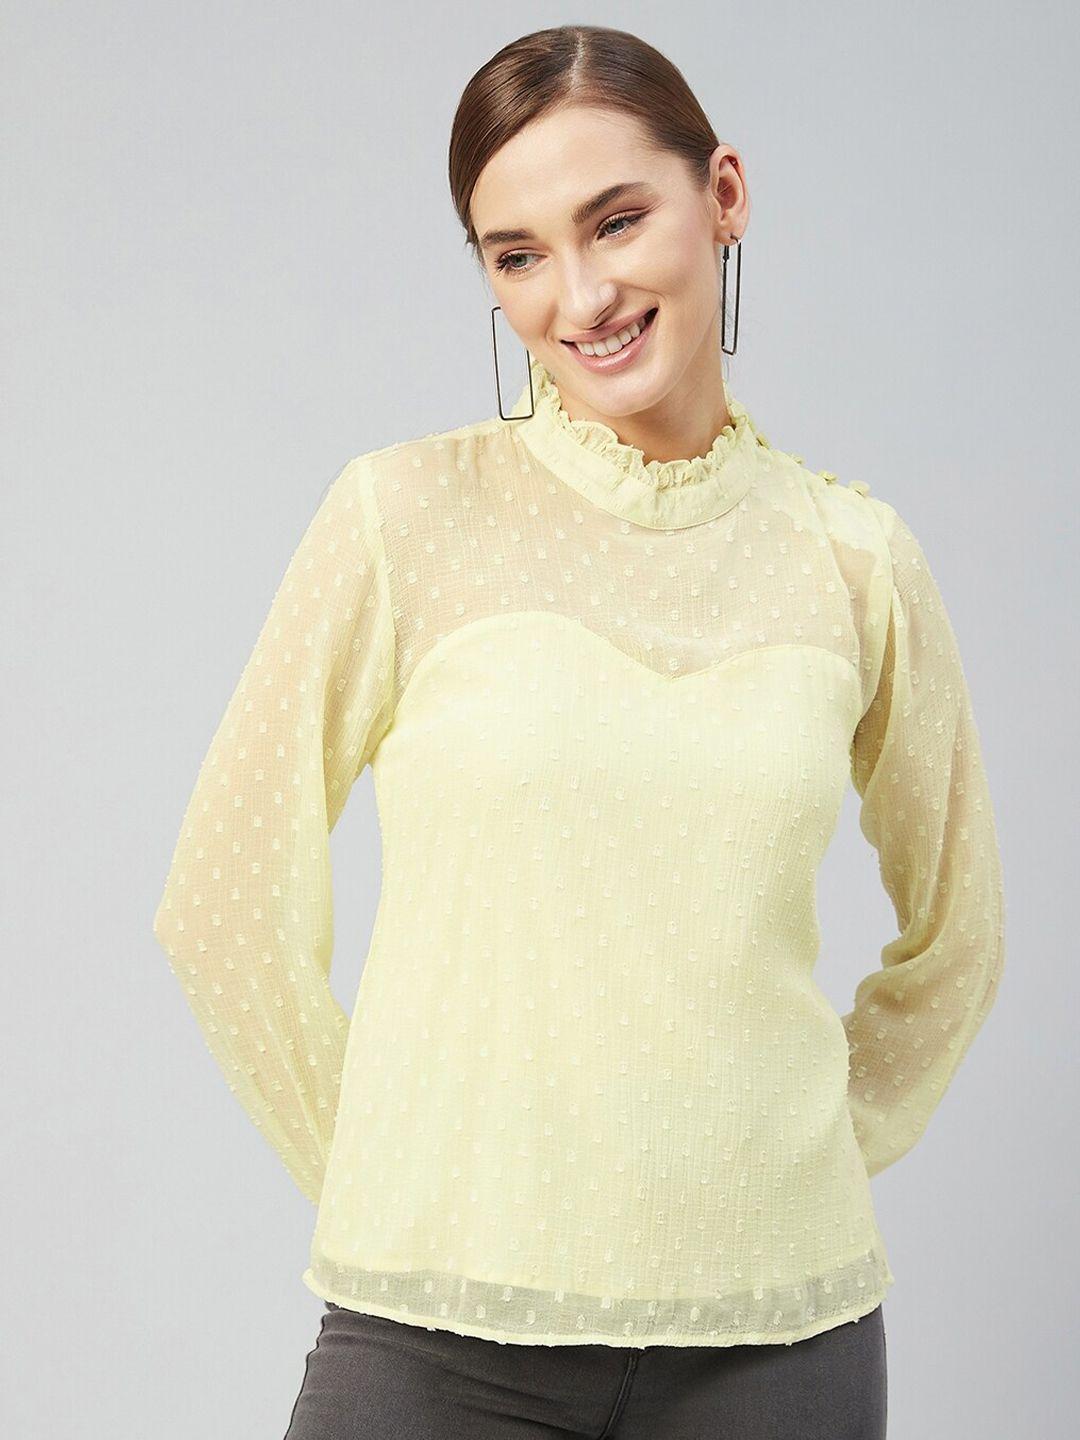 marie claire lime green dobby woven design ruffled chiffon top